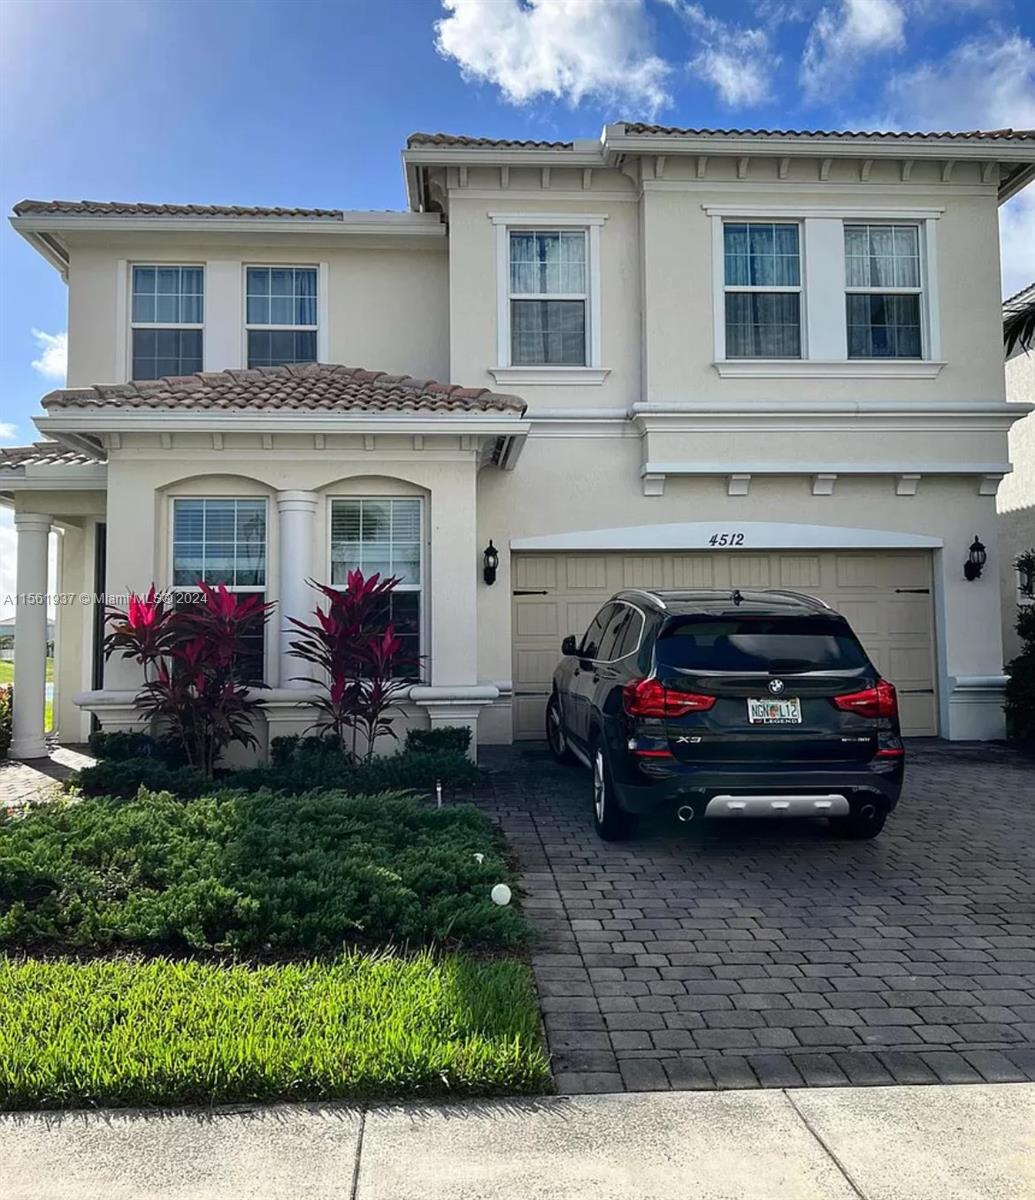 Address Not Disclosed, Hollywood, Broward County, Florida - 5 Bedrooms  
3 Bathrooms - 